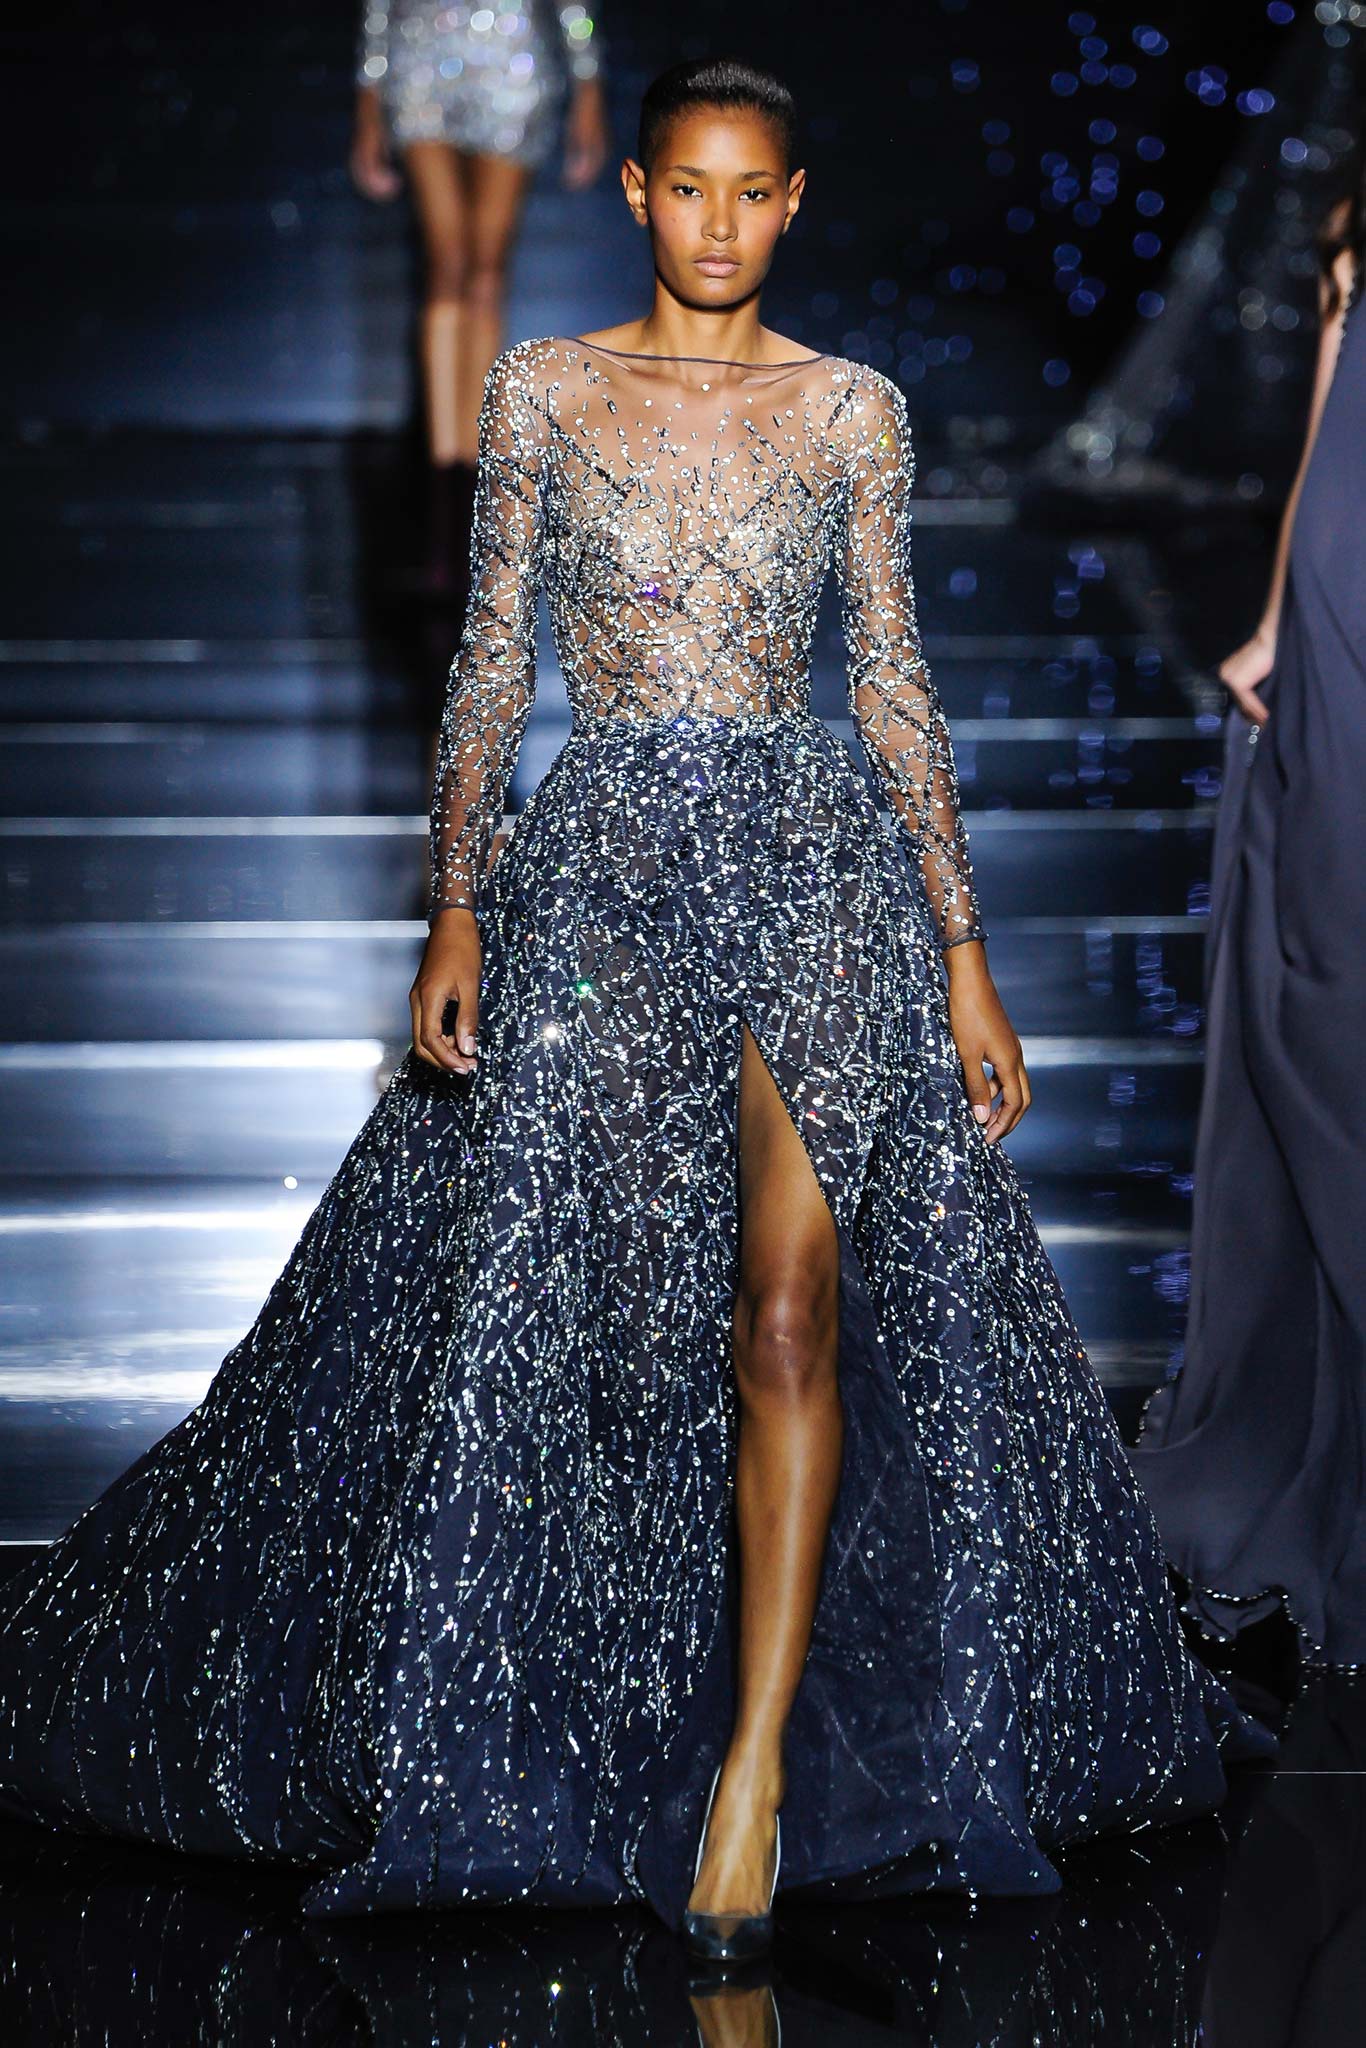 HAUTE COUTURE FASHION PHOTOS: Zuhair Murad Fall 2015 couture collection from Paris